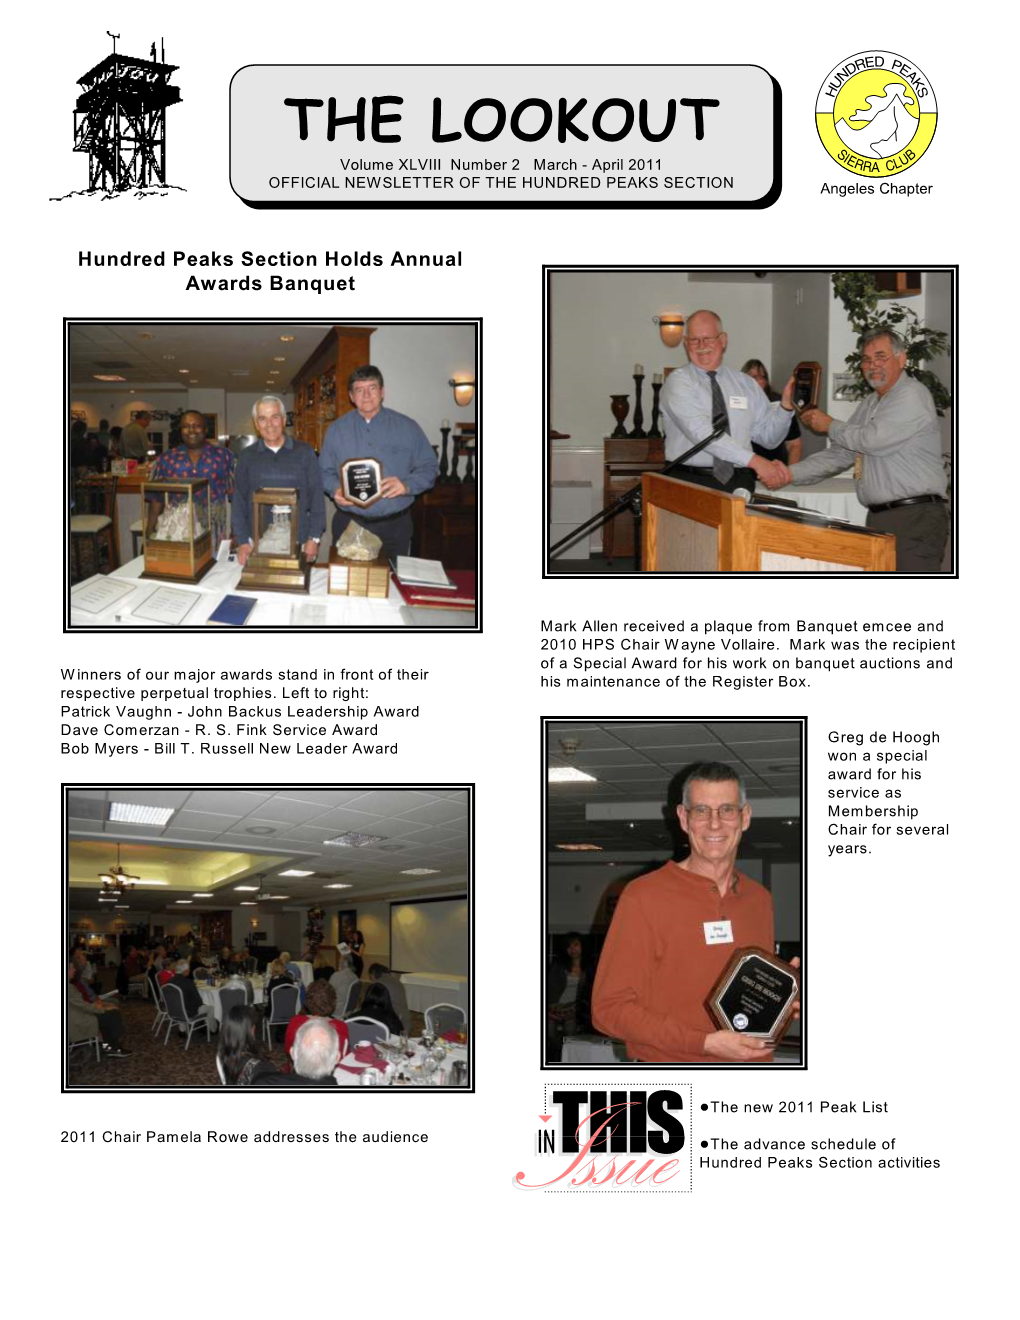 THE LOOKOUT Volume XLVIII Number 2 March - April 2011 OFFICIAL NEWSLETTER of the HUNDRED PEAKS SECTION Angeles Chapter